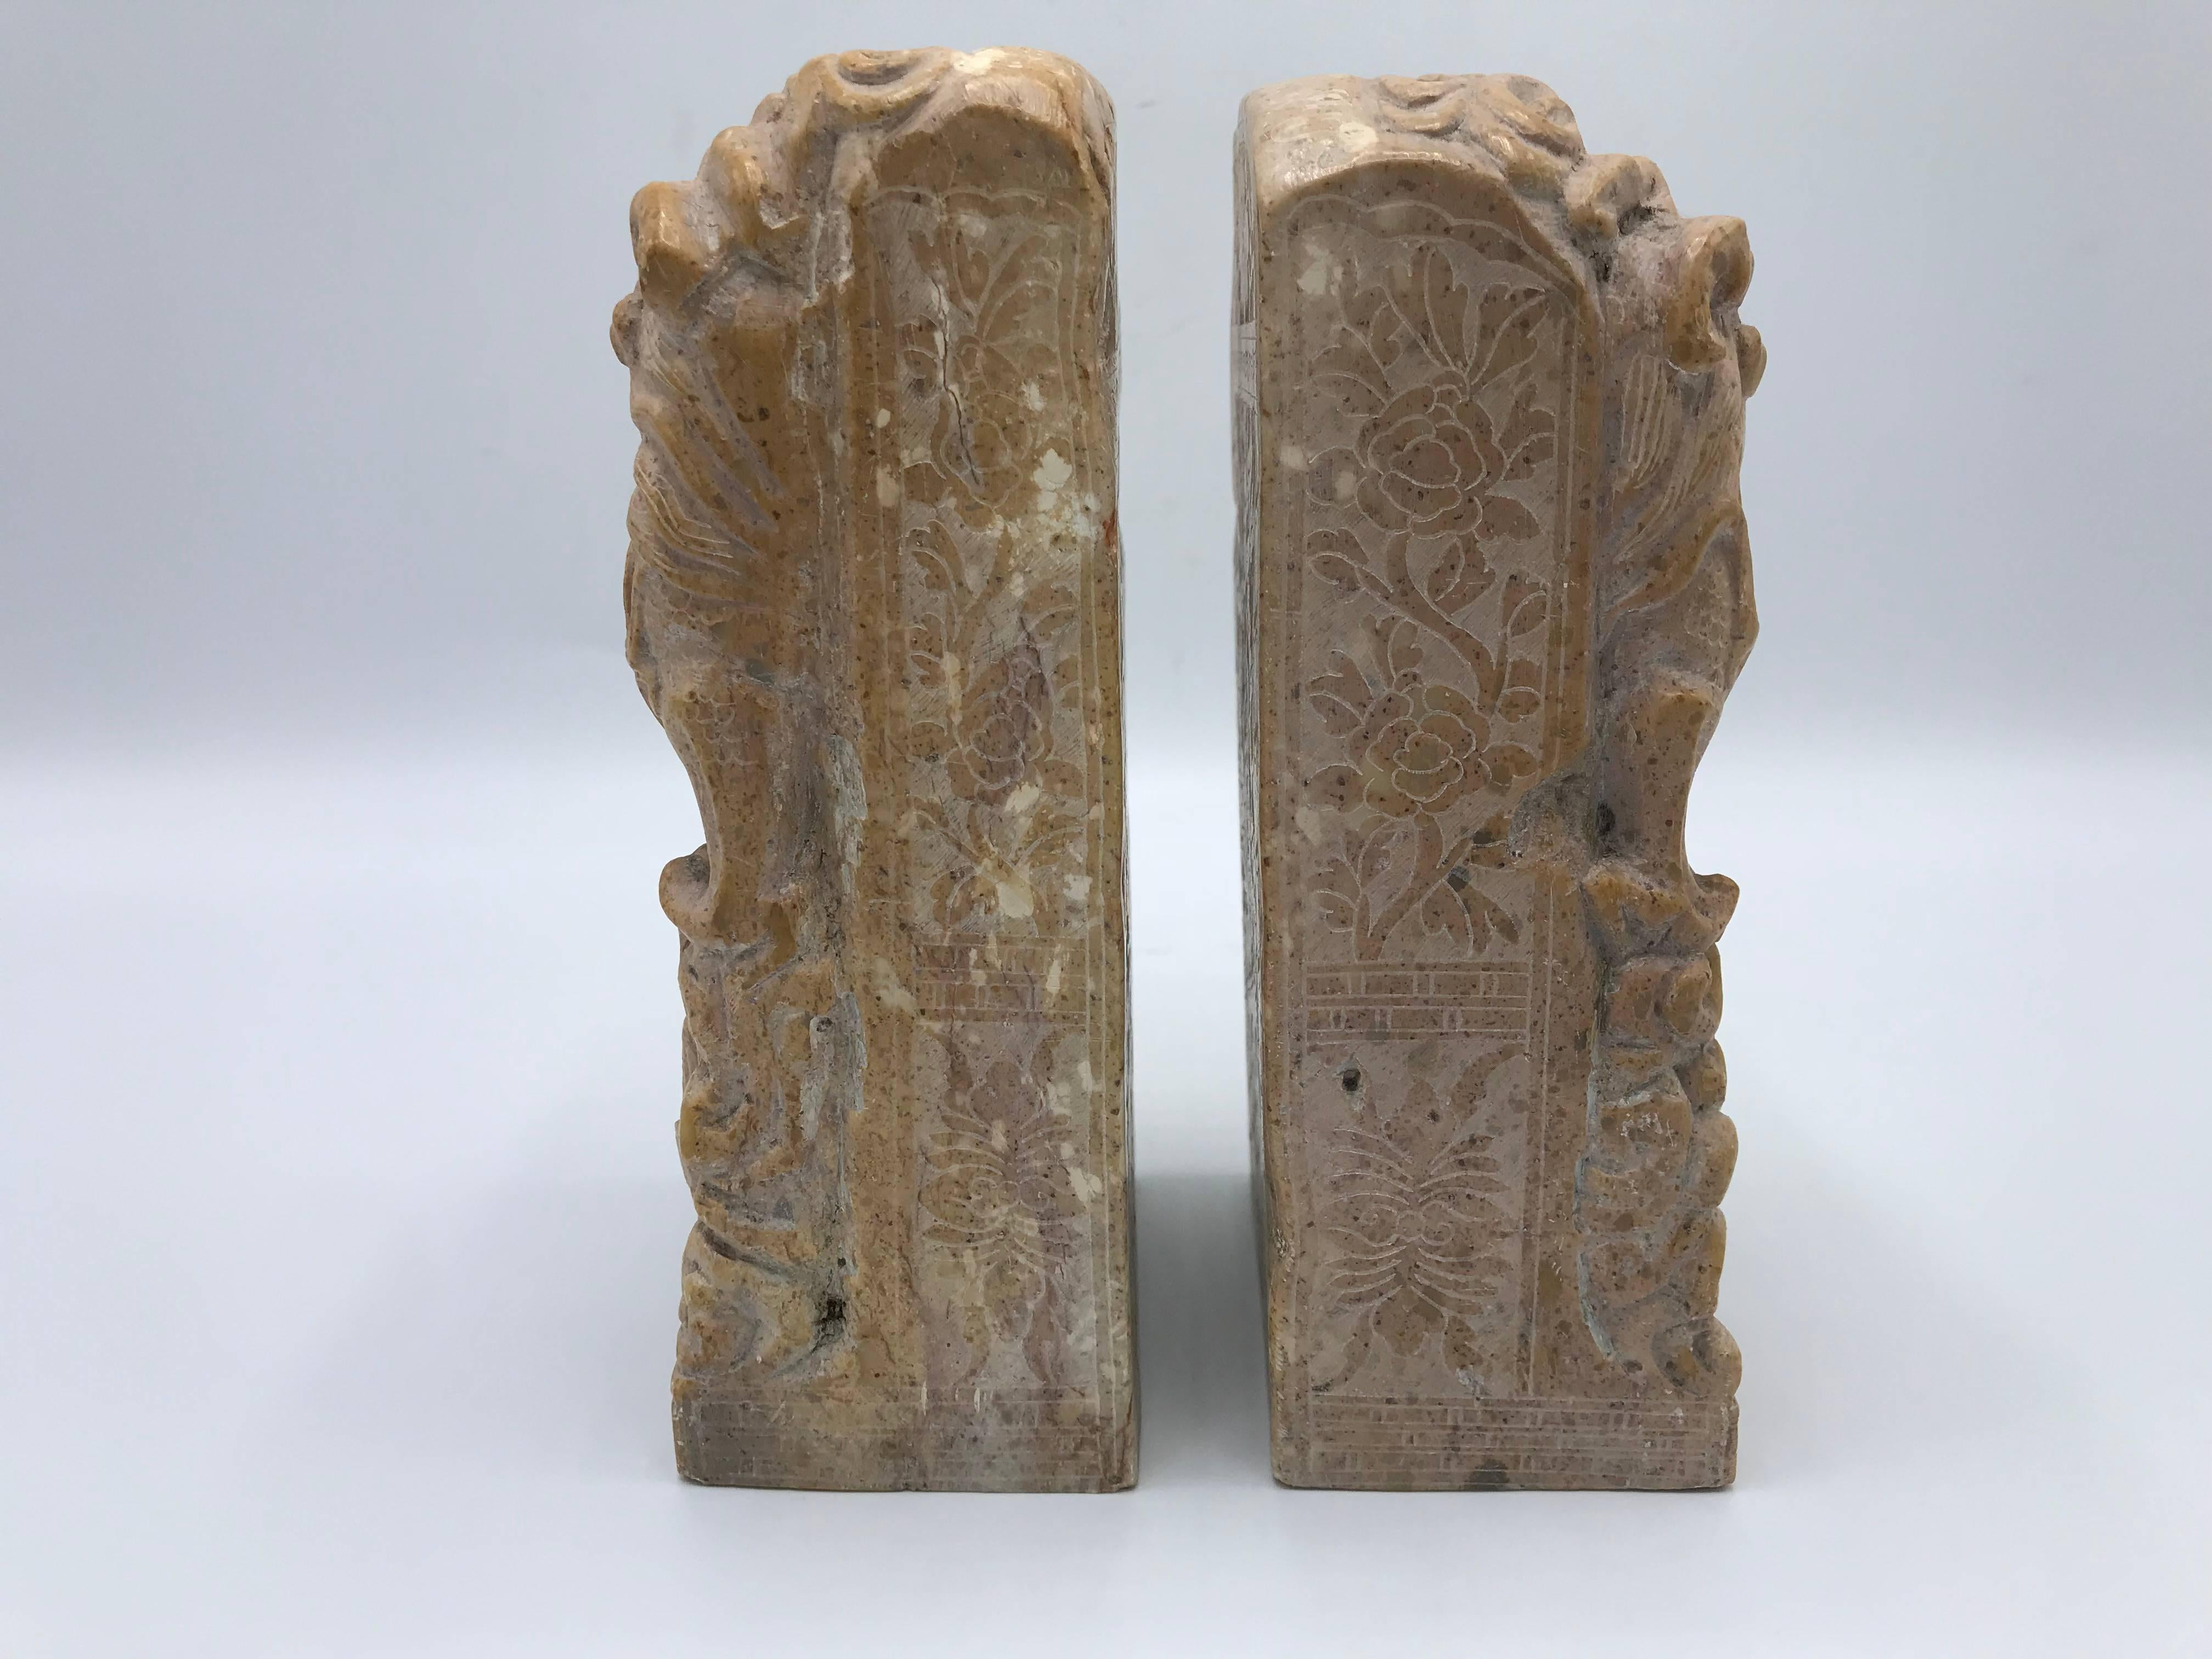 Offered is a gorgeous, pair of 1960s Italian marble bookends. The bookends have an Asian dragon motif on each, mirroring one another. Heavy.